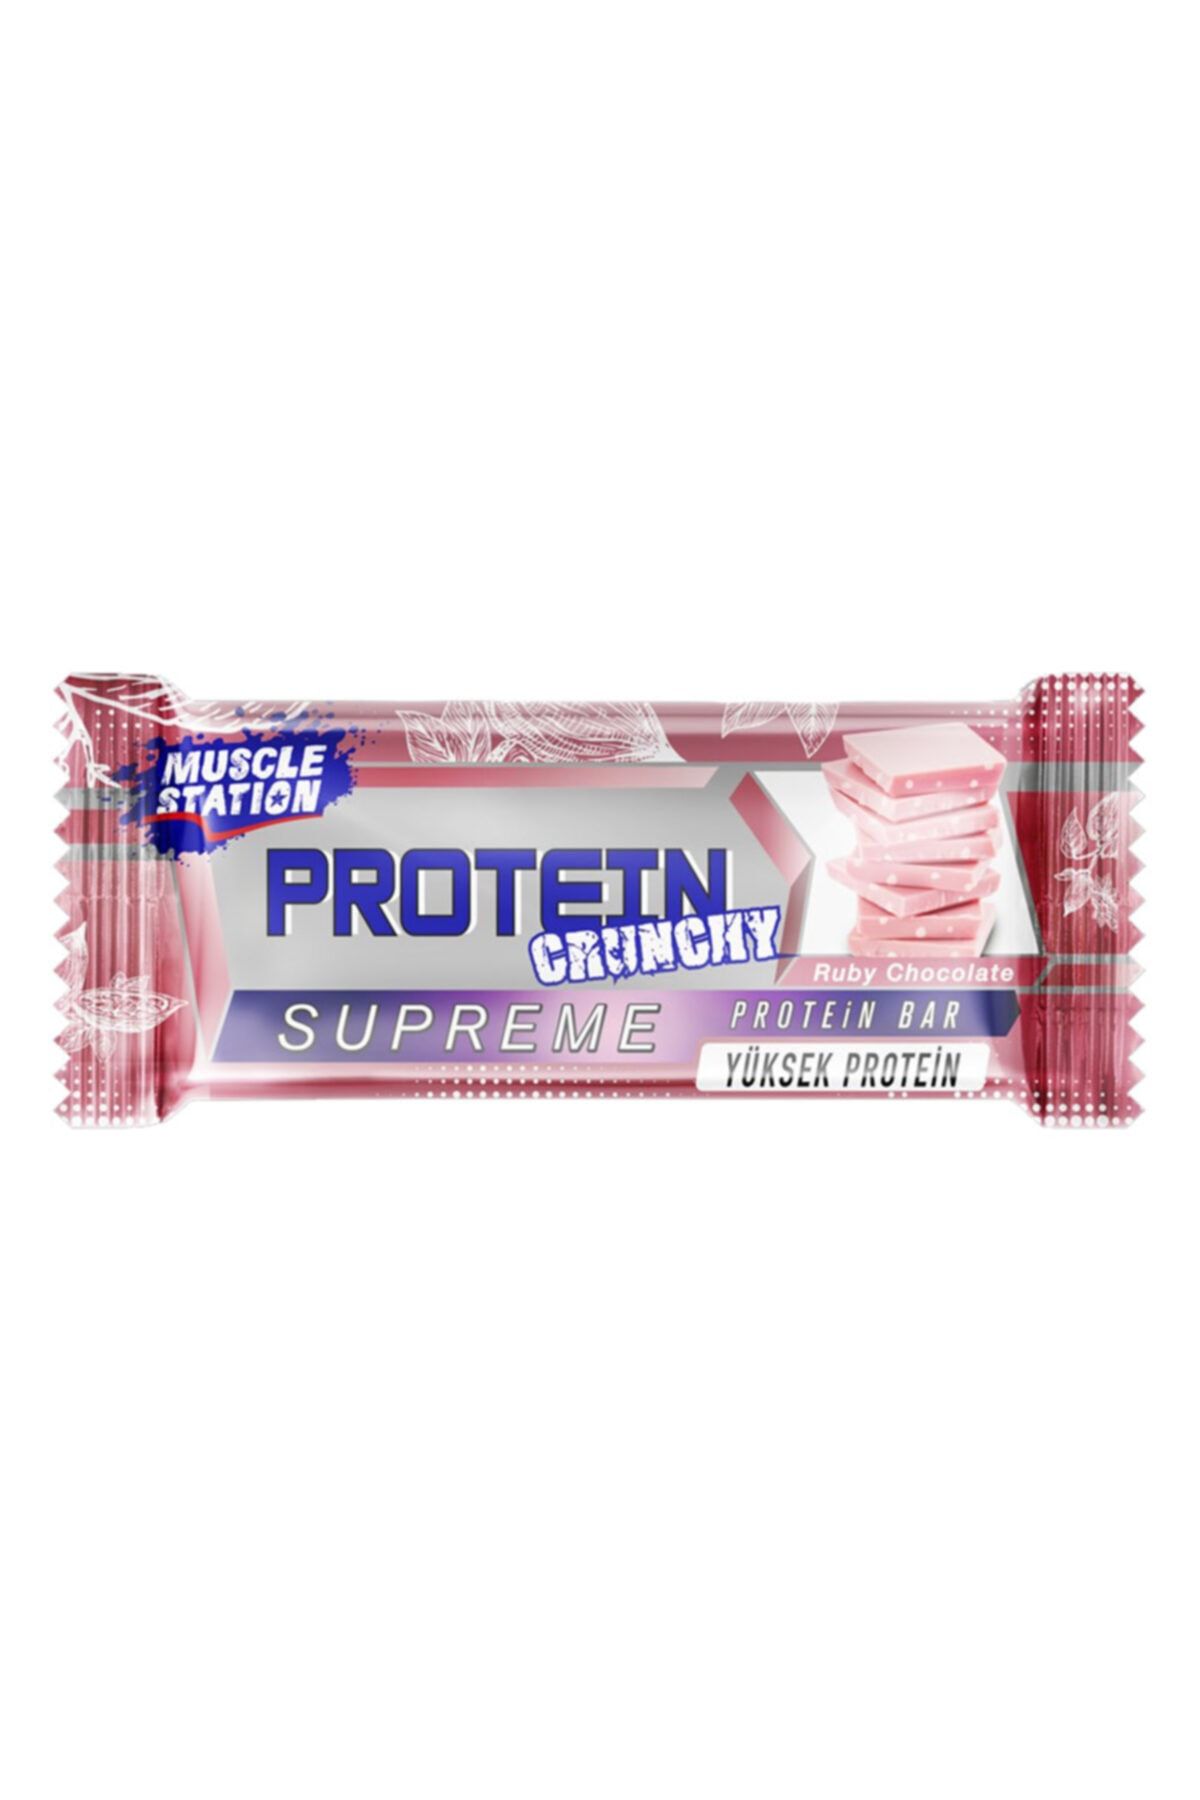 Muscle Station Supreme Ruby Chocolate Crunchy 1 Adet